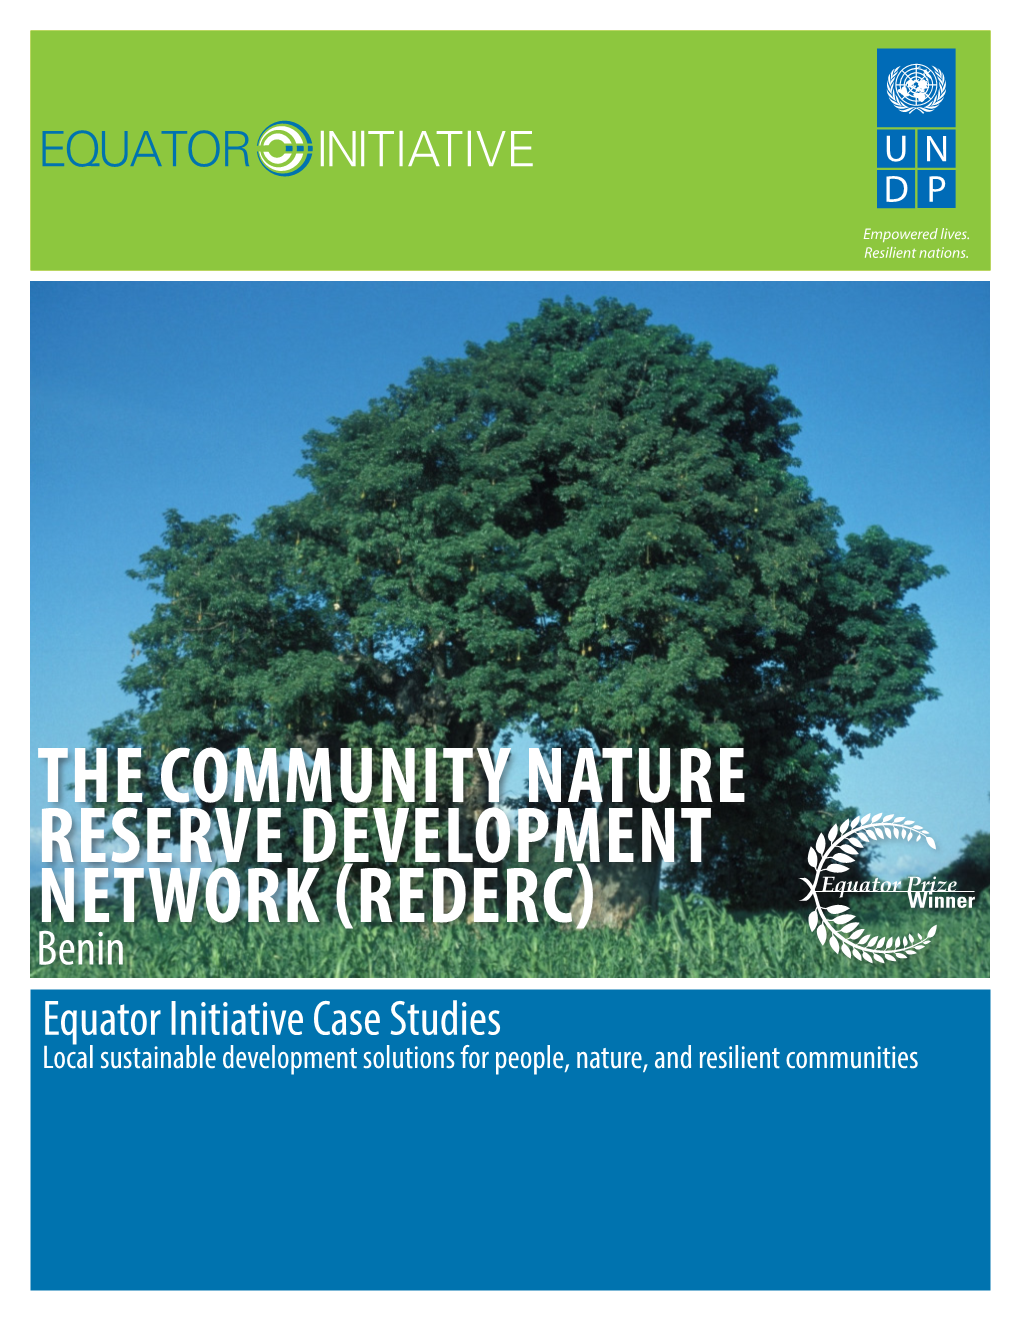 The Community Nature Reserve